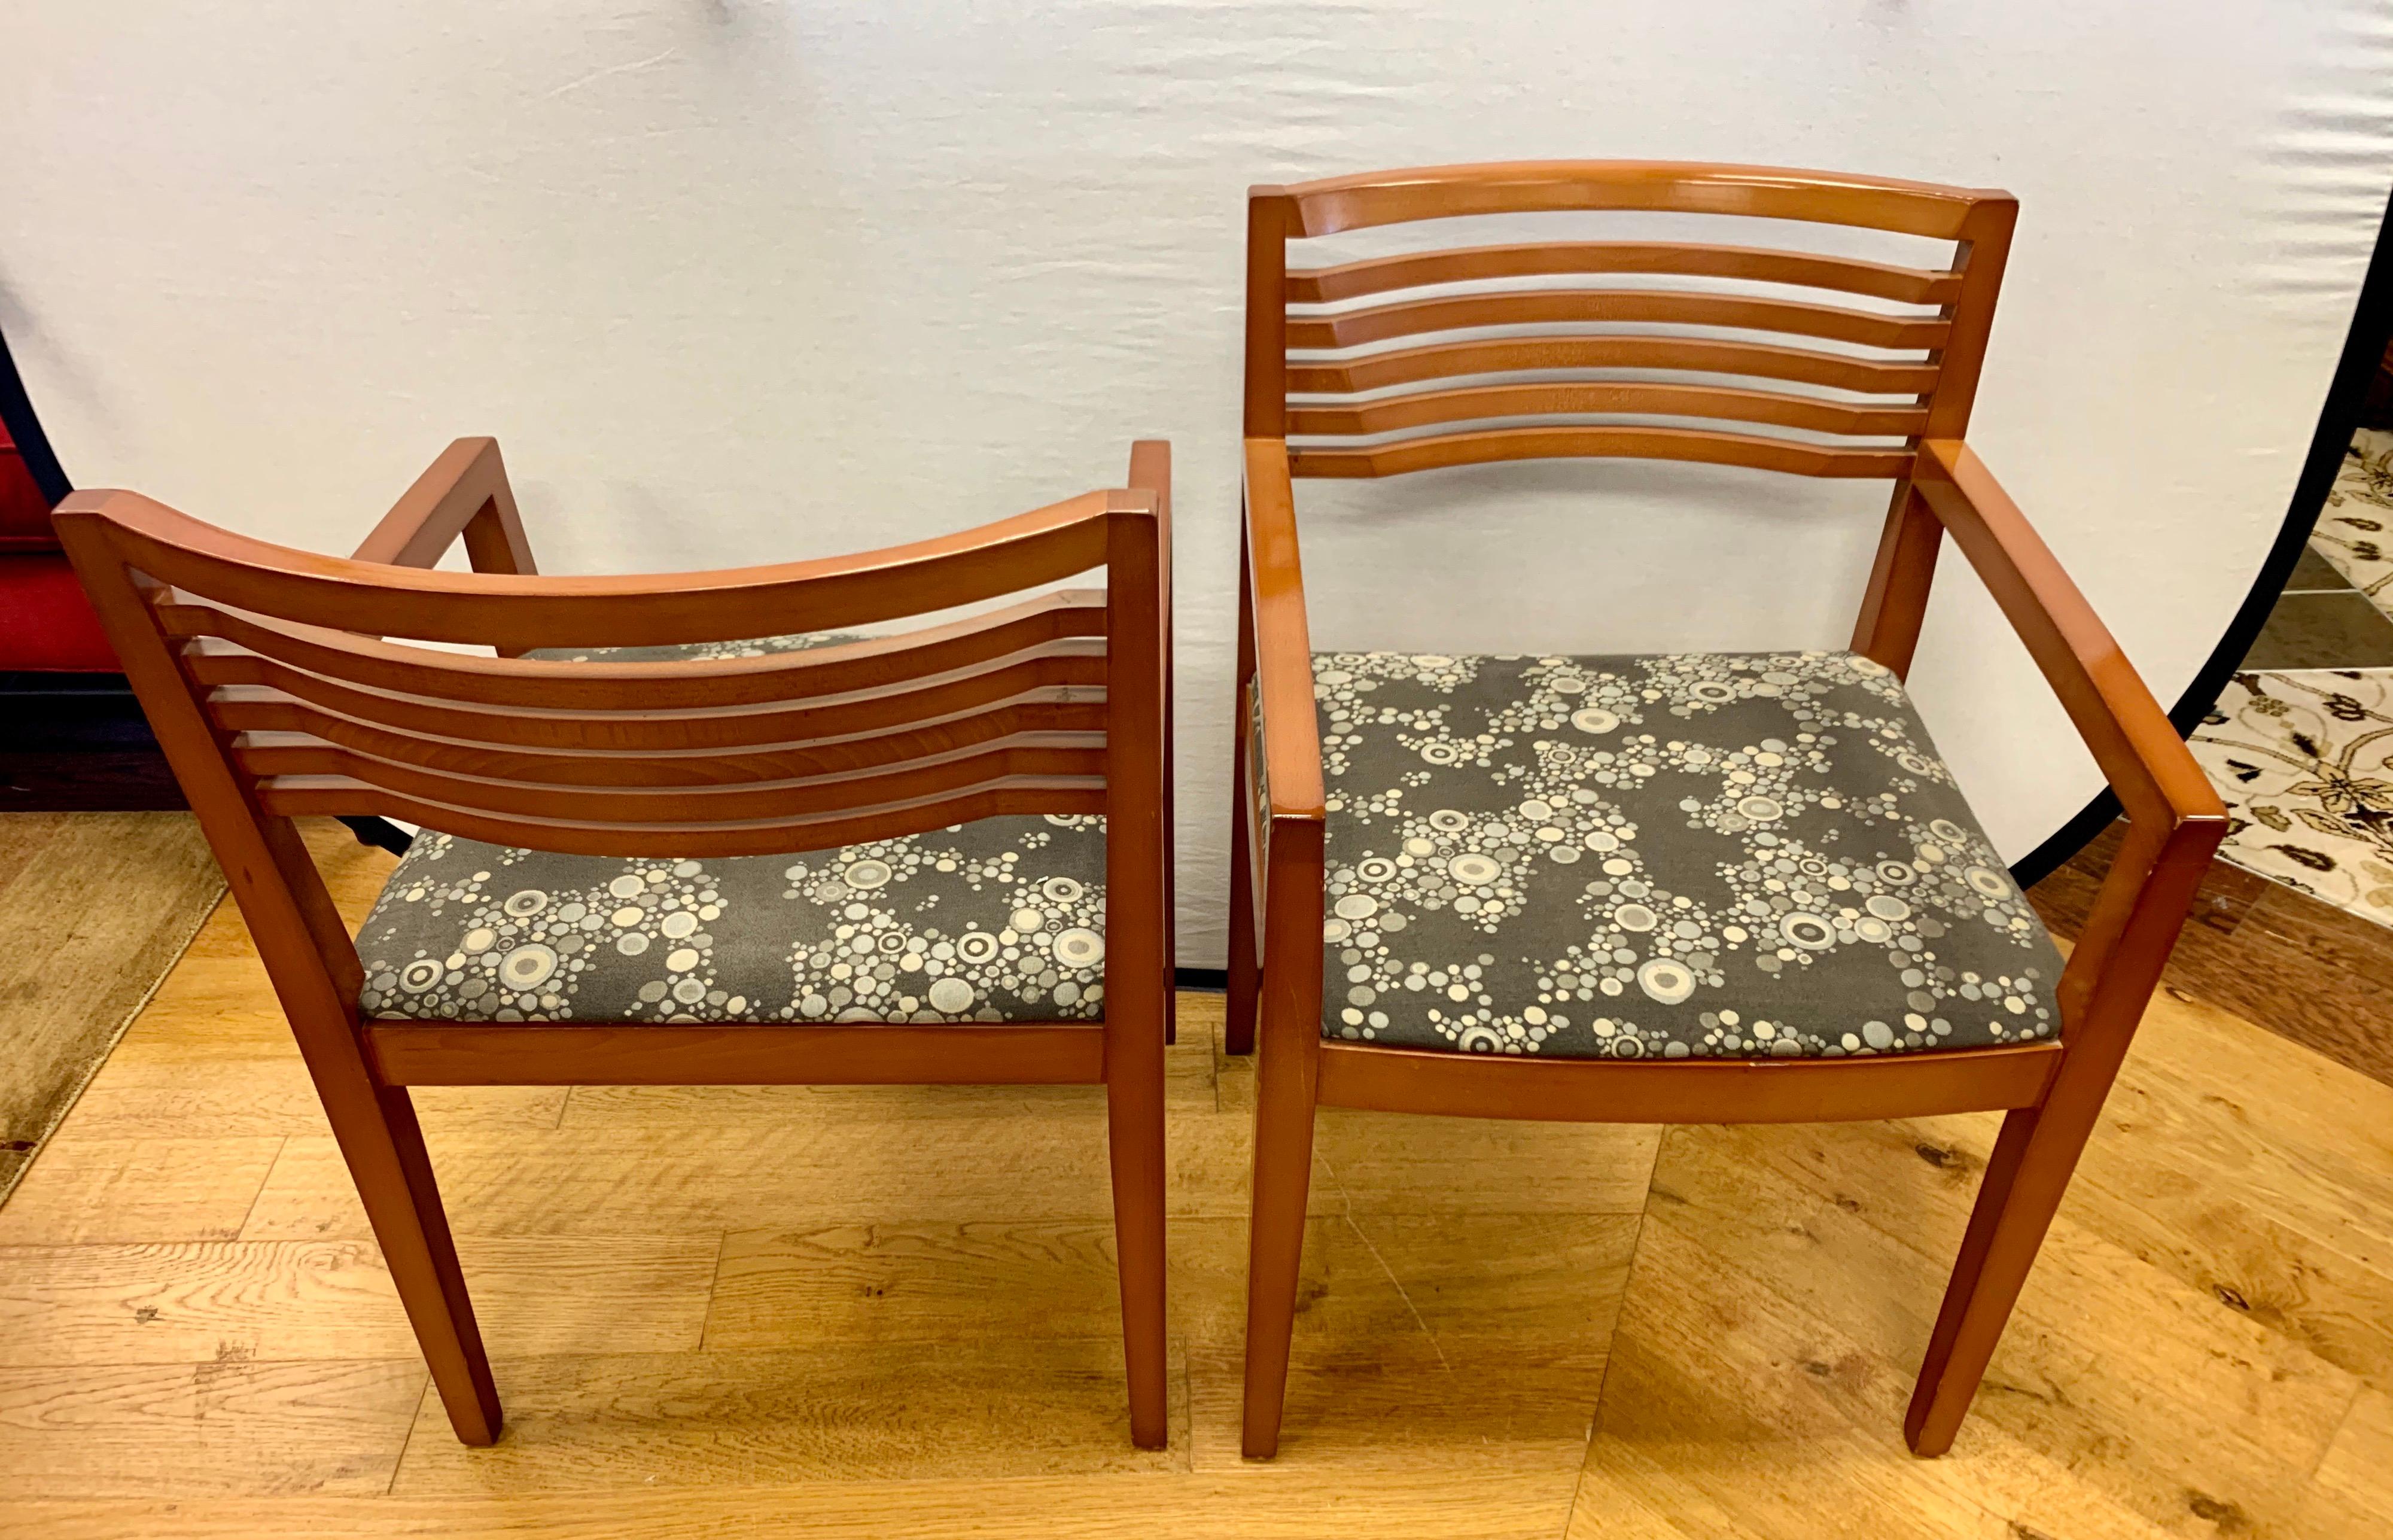 Set of twelve Knoll Studio Ricchio armchairs designed by Joseph and Linda Ricchio in 1990. The chairs are done in a medium beechwood finish and have a gorgeous Knoll fabric on the seat which gives it an iconic midcentury look. The chairs retain the